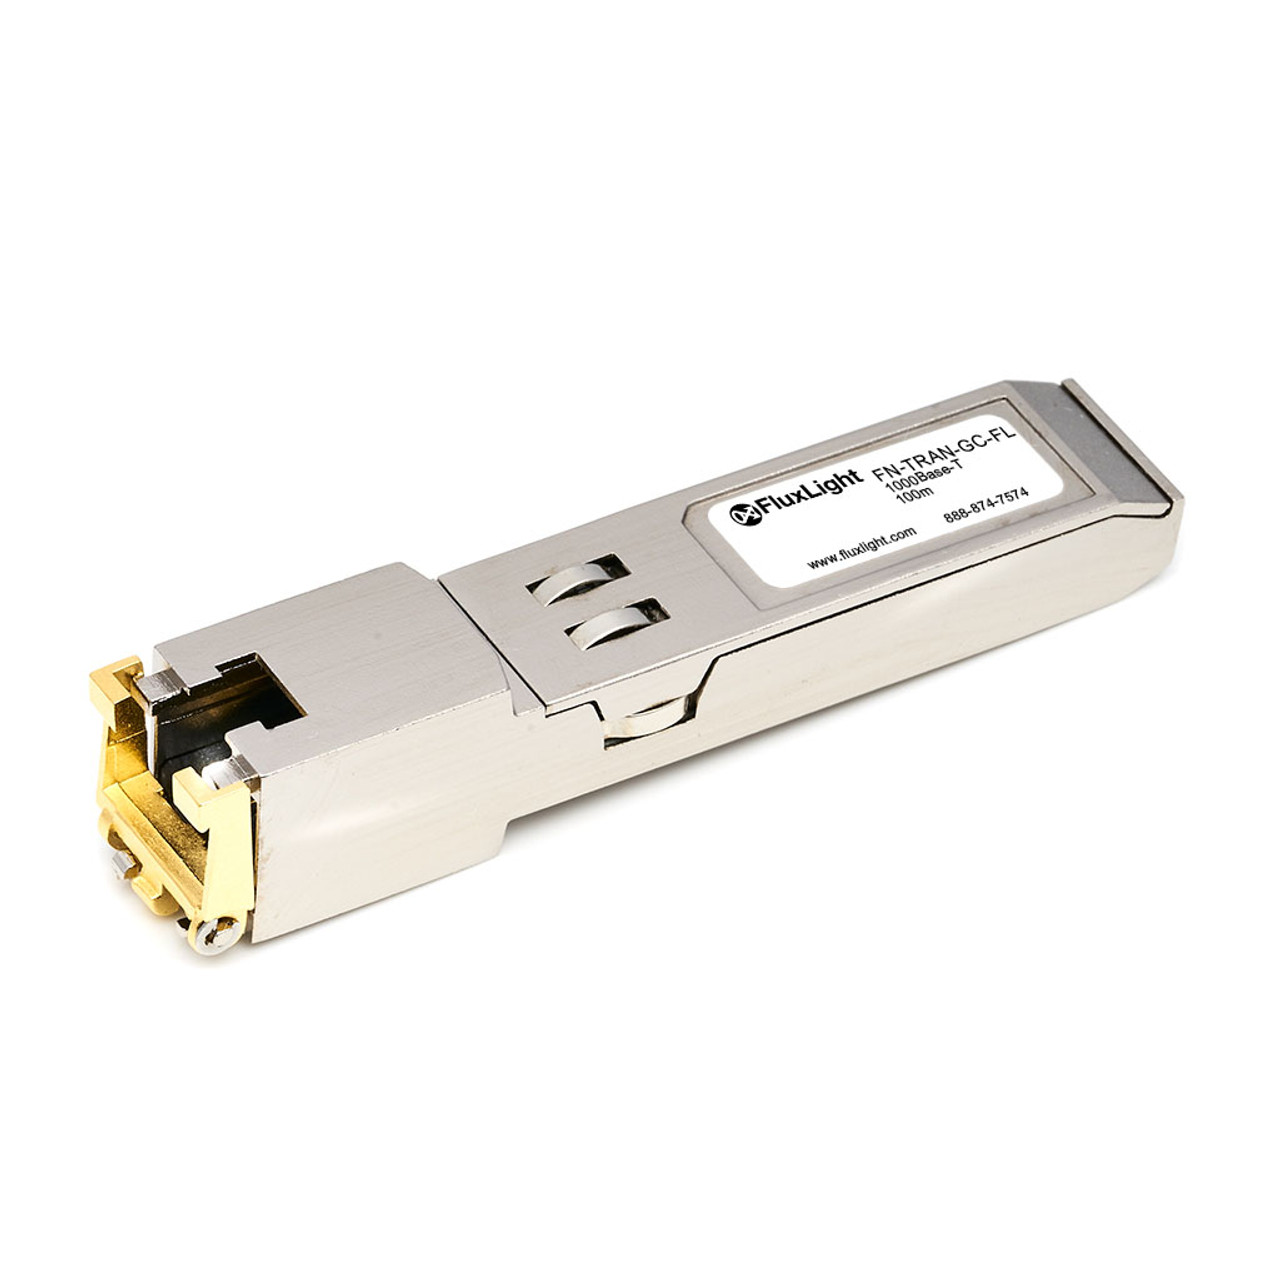 1Ge Sfp Rj45 Transceiver Module For Systems With Sfp And SfpSfp Slots - FORTINET